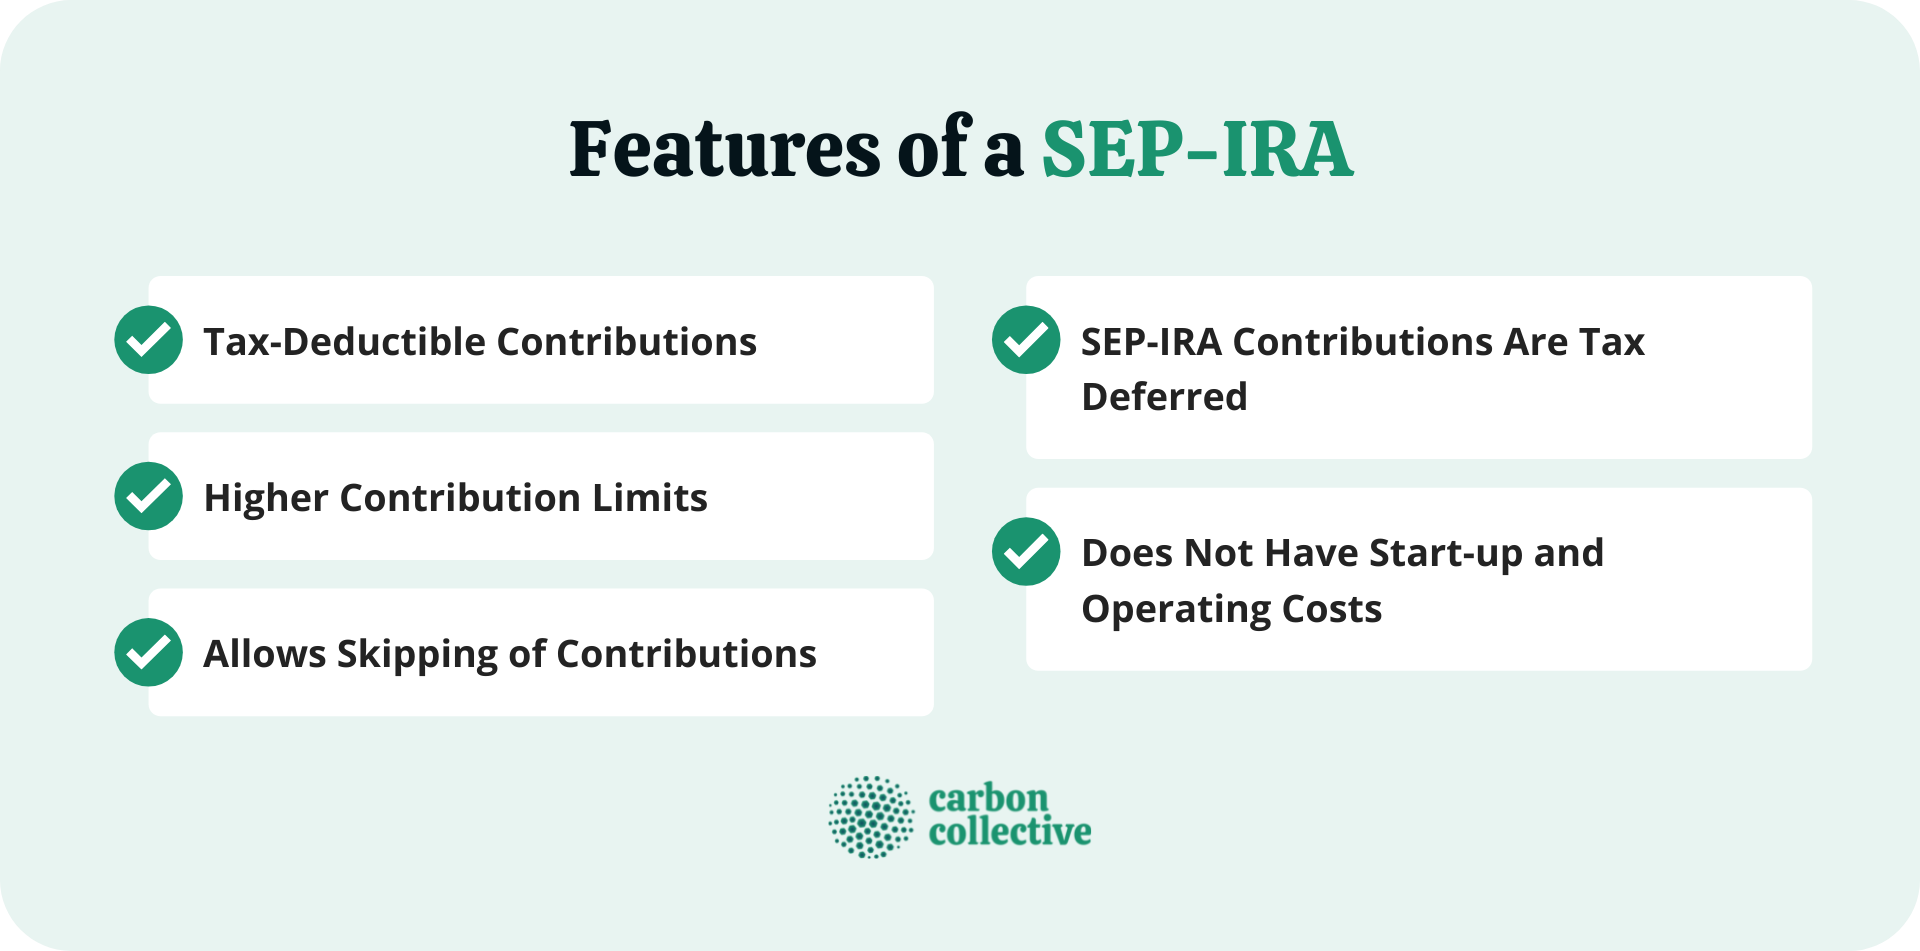 SEPIRA Definition, Features, Contribution Limits, & Rules